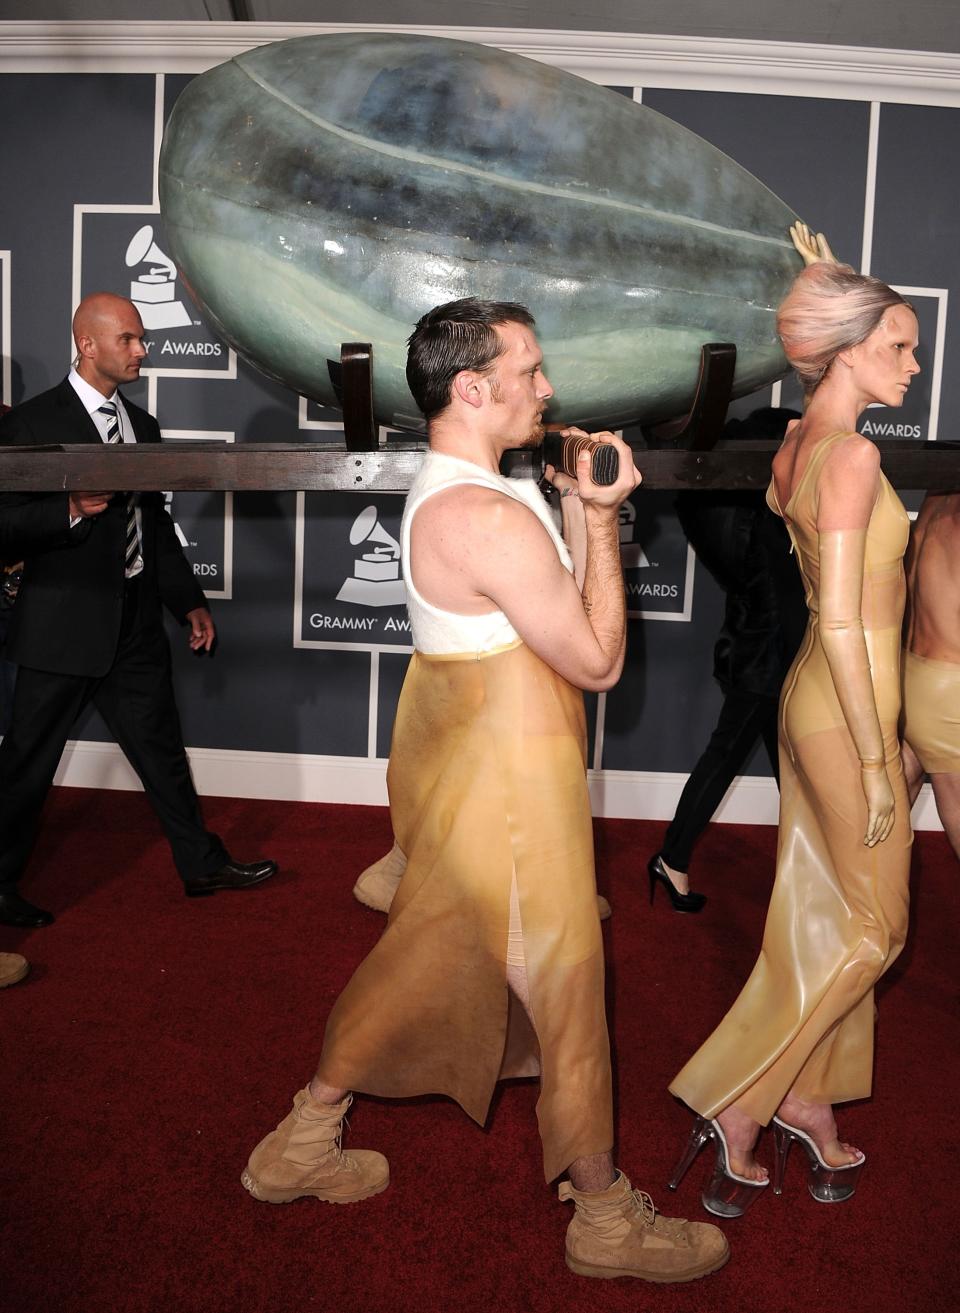 19 of Lady Gaga’s Campiest Outfits That Were Made for the Met Gala